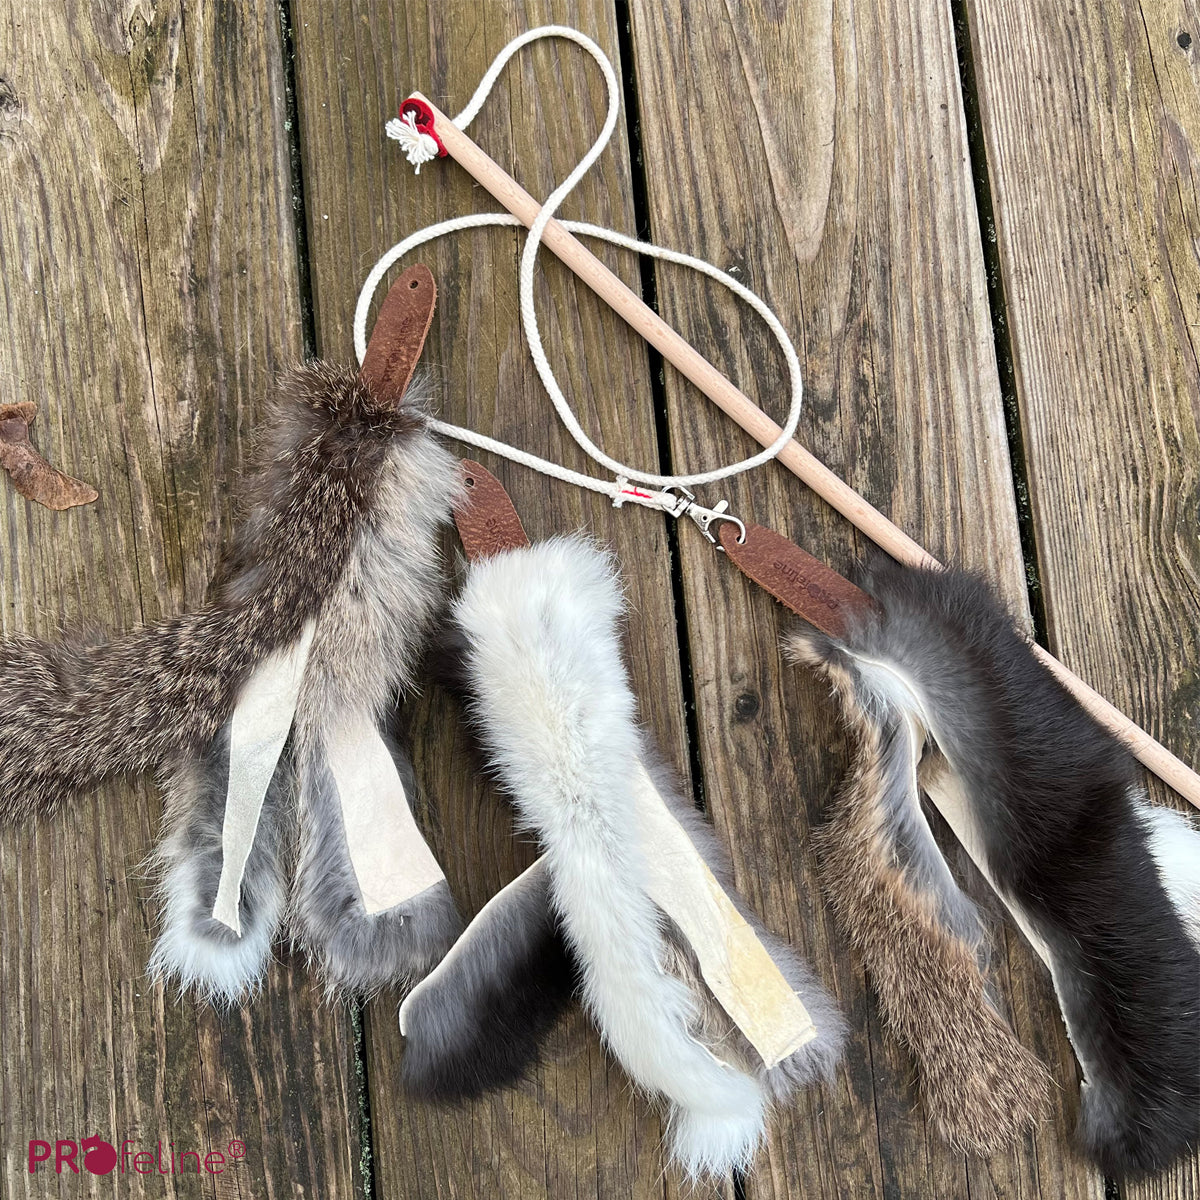 Profeline Cat Toy, Fur Shaggy Rabbit Refill, With Attachment for Wands | at Made Moggie